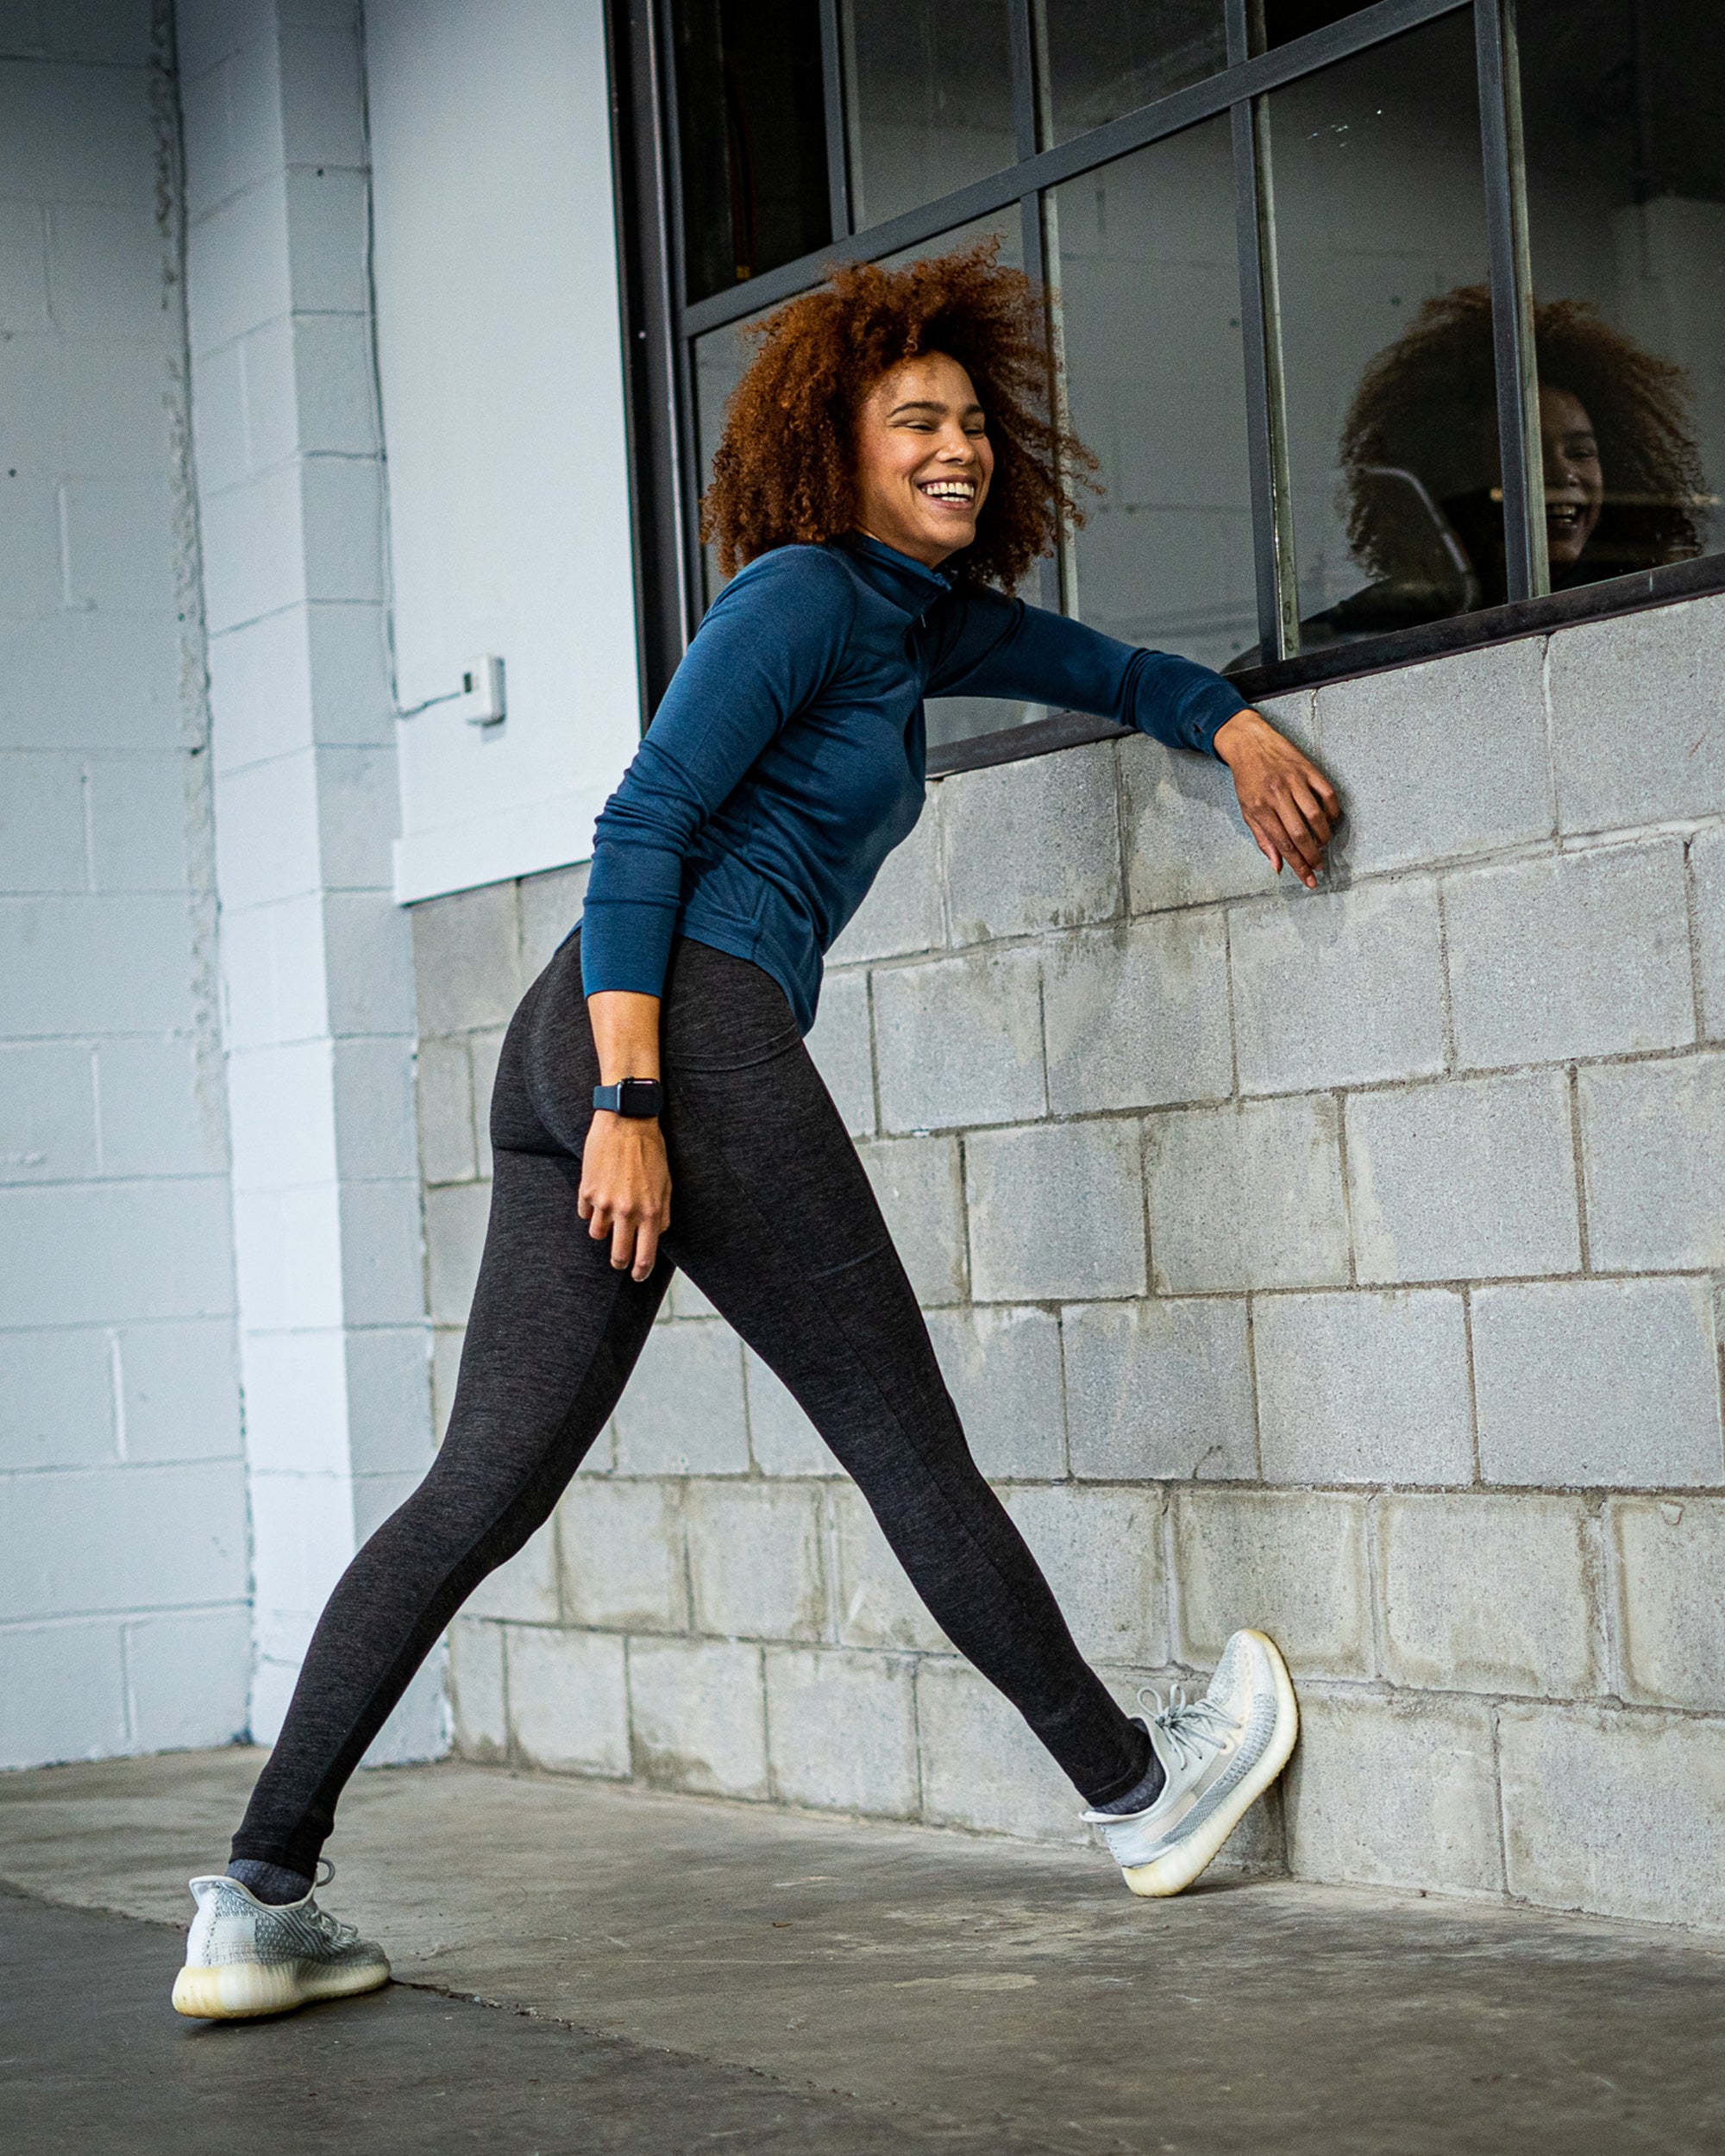 Merino Leggings with pockets? You asked for it, and Woolx